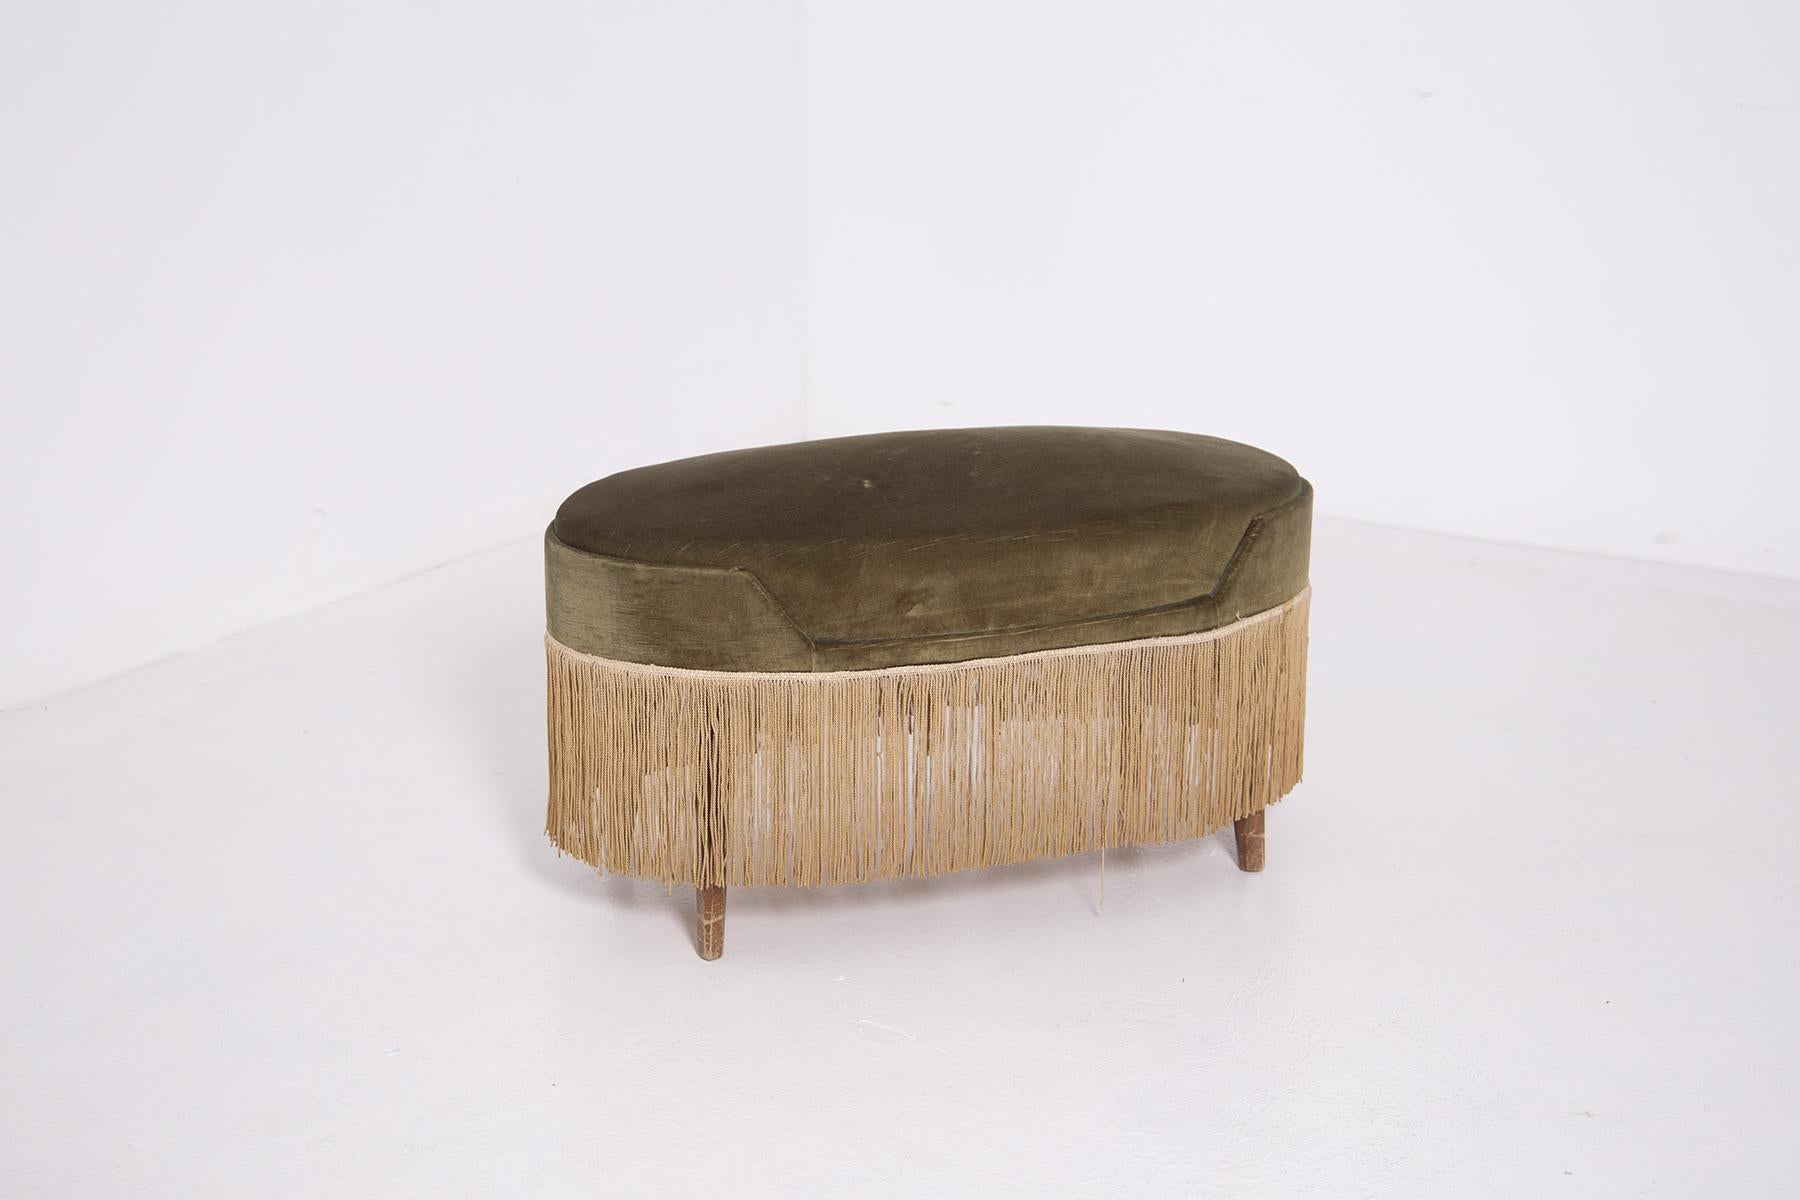 Elegant pouf made by Osvaldo Borsani in the 1950s. The pouf is in its original conditions of the time. Its original fabric is dark green velvet.
To complete and make this product unique are its skirt bangs inserted on the entire circumference of